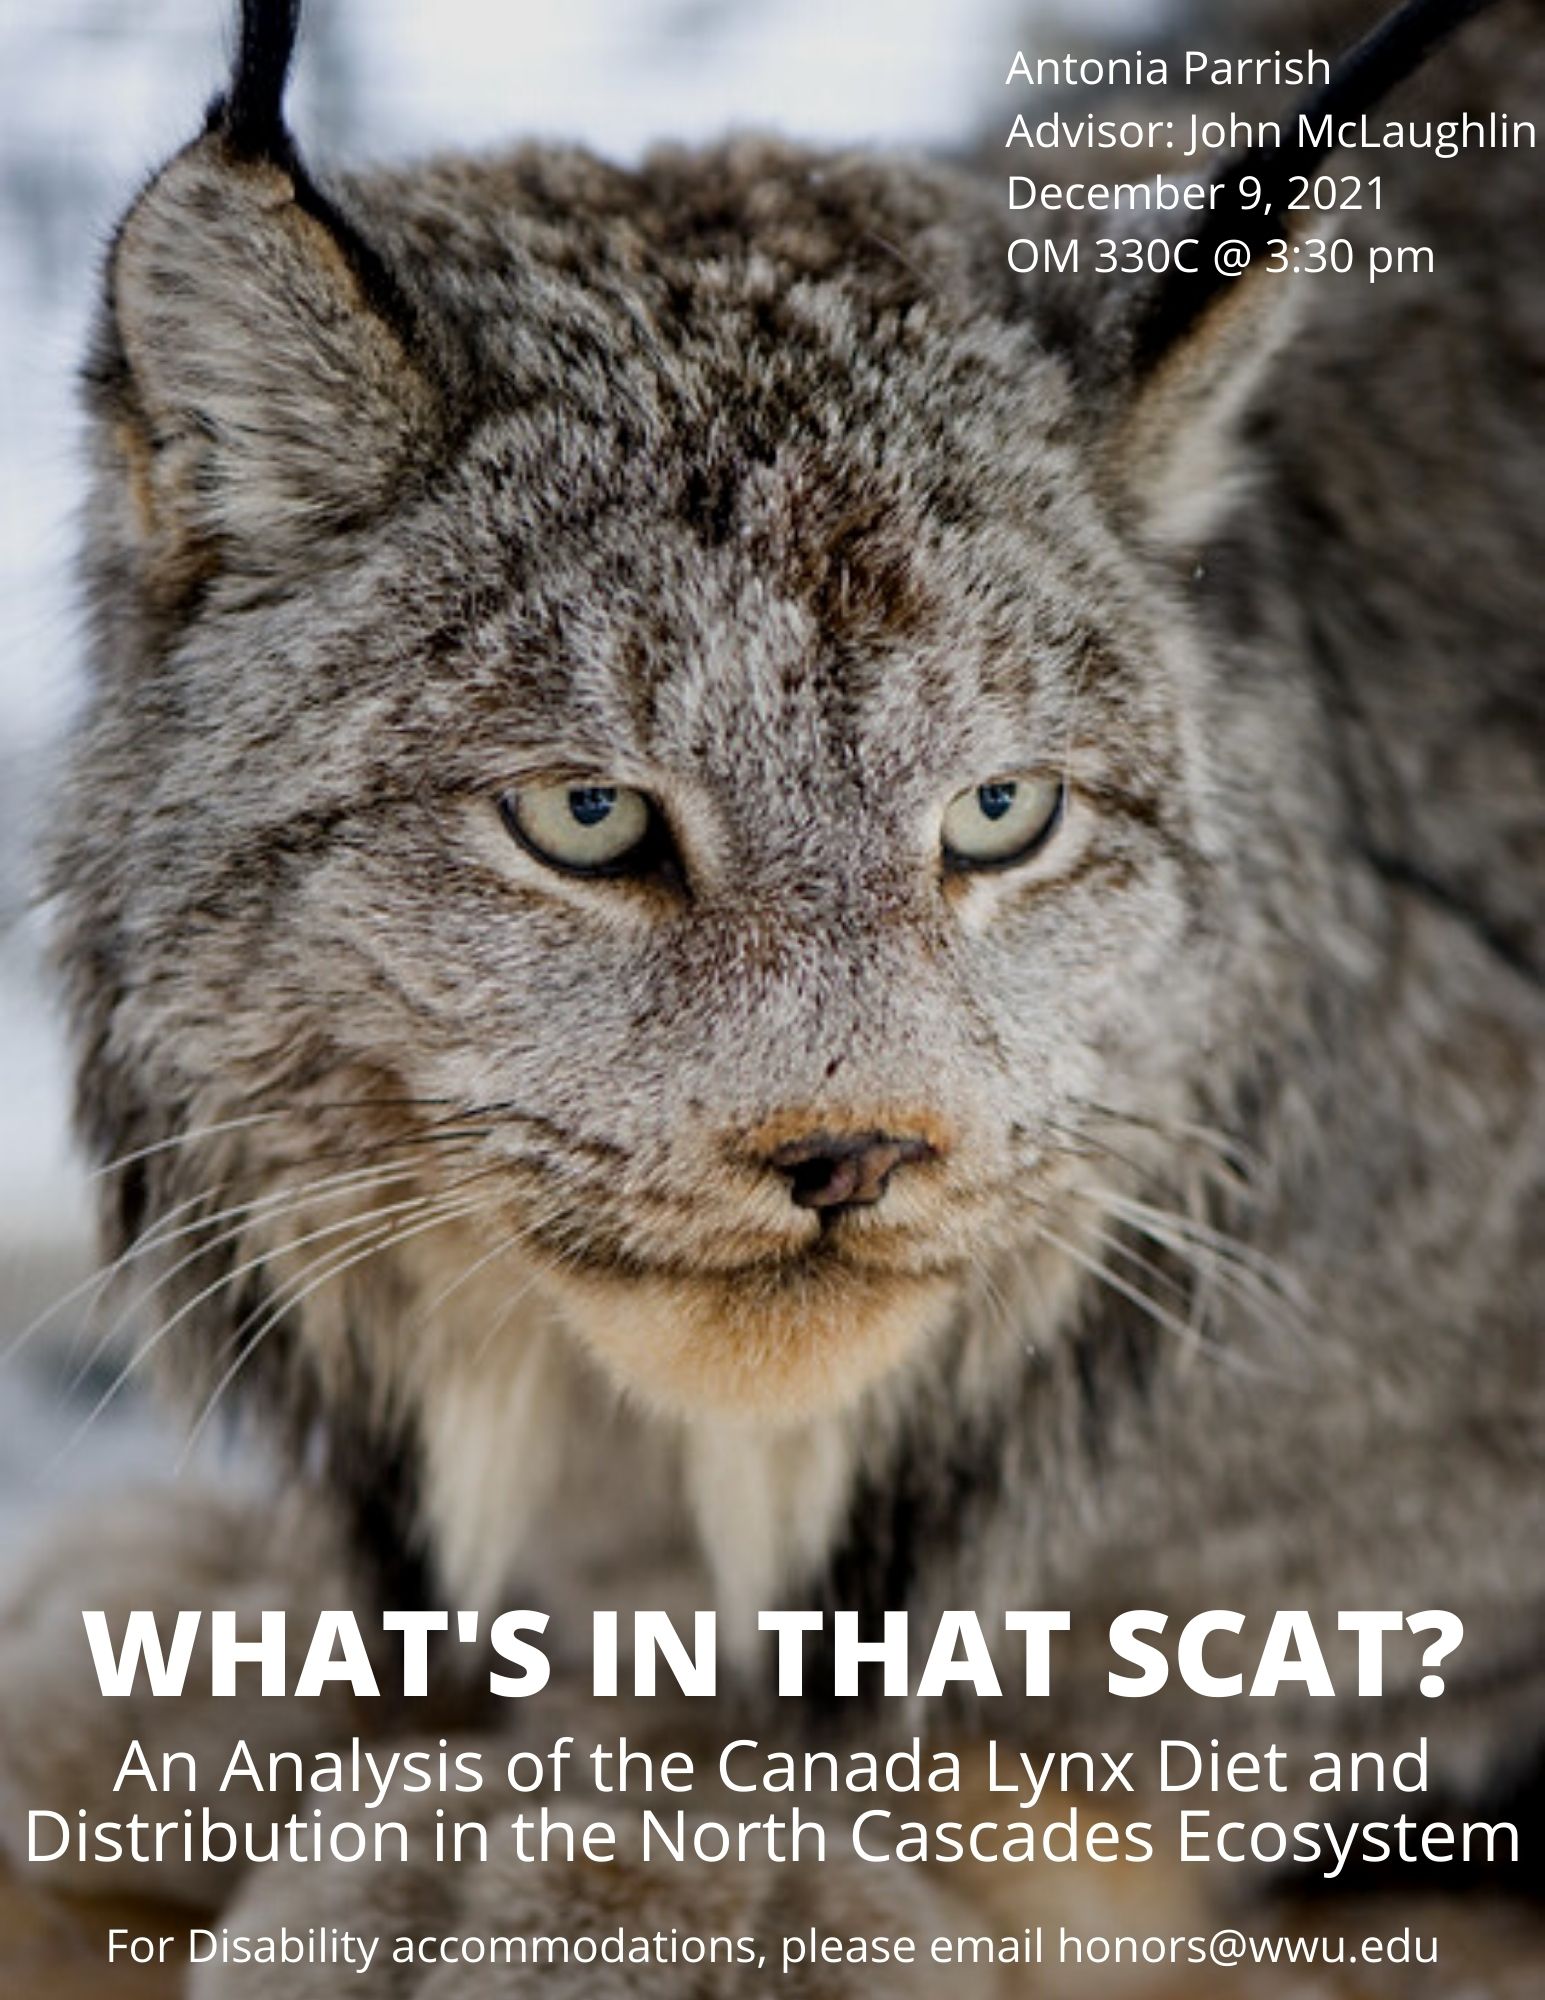 Please attend my presentation titled "What's in that Scat?: An analysis of the Canada lynx diet and distribution in the North Cascades Ecosystem" on December 9, 2021 in room OM 330C at 3:30 pm.  The poster depicts a close-up image of a Canada lynx.